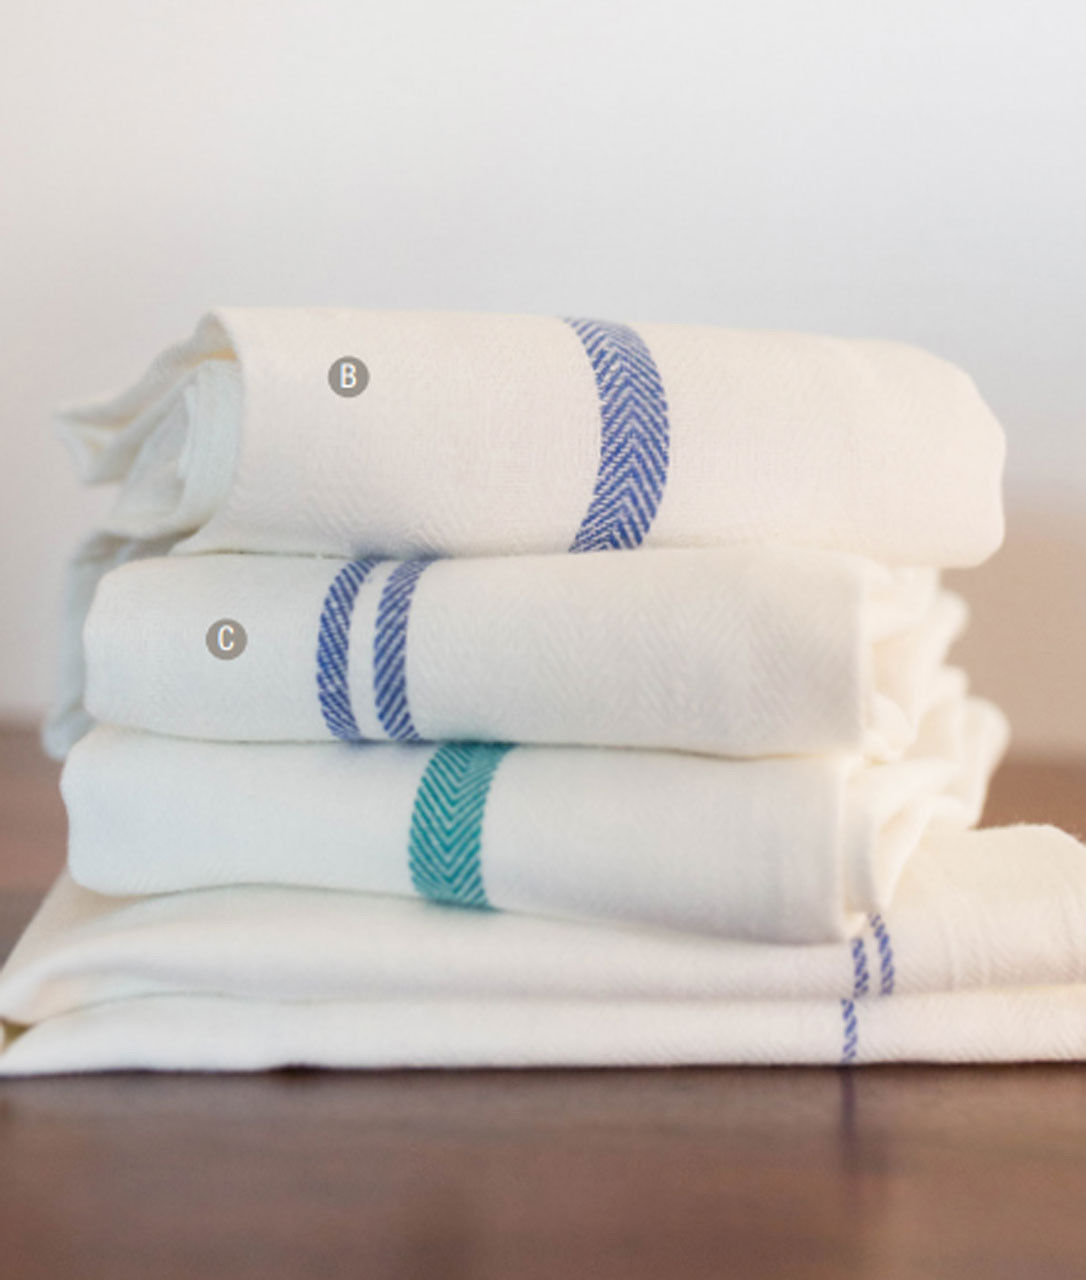 Are the Cotton Striped Herringbone Kitchen Towels made of 100 percent cotton?